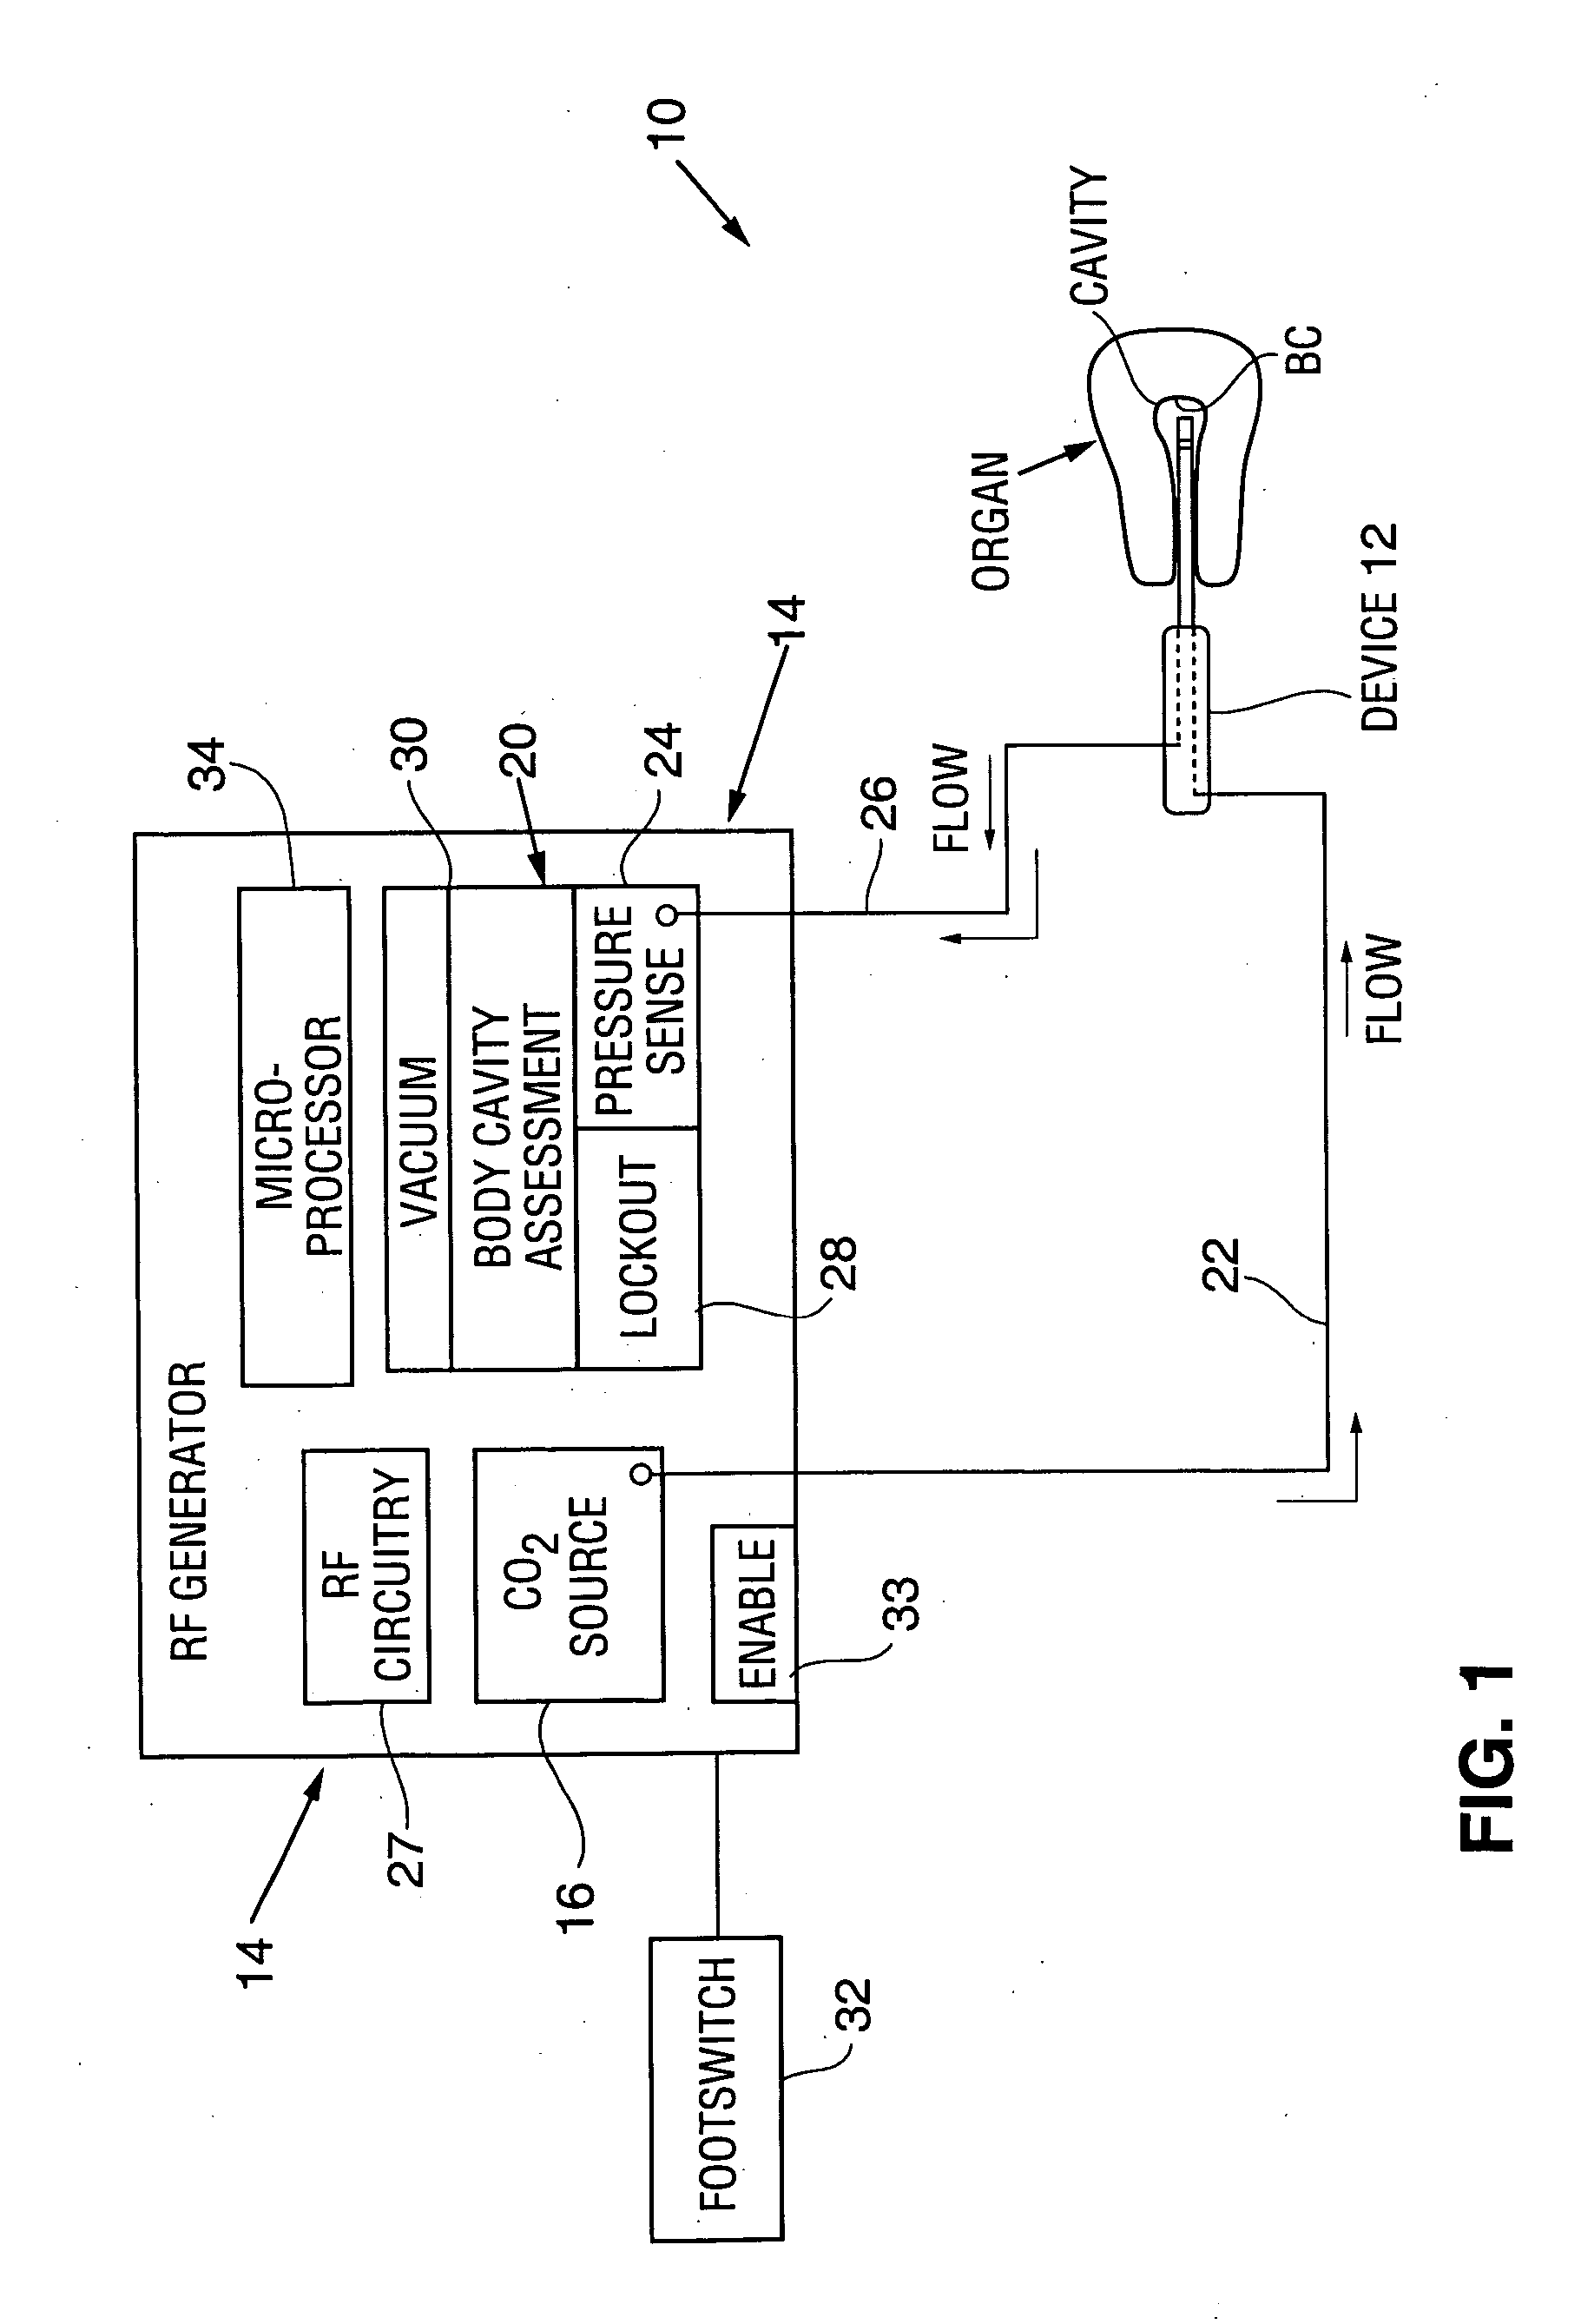 System and method for detecting perforations in a body cavity